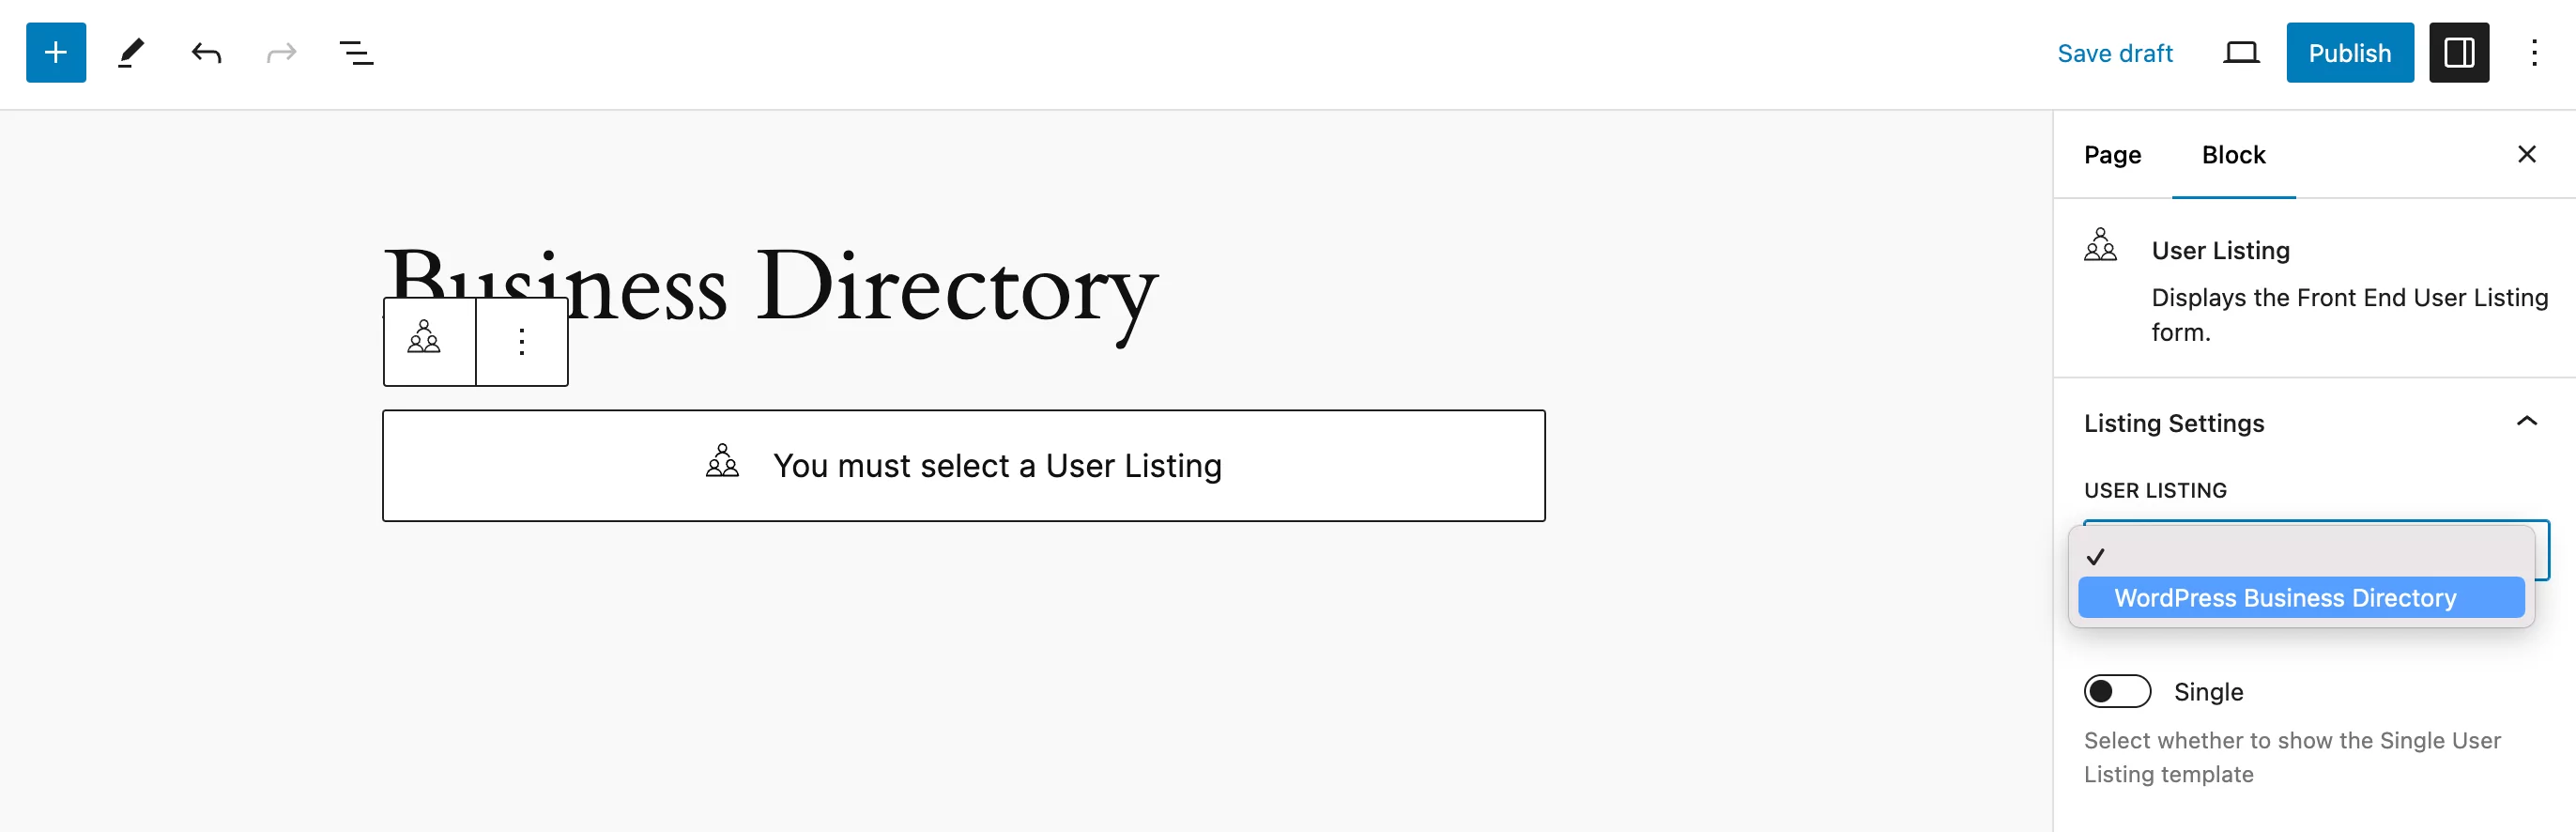 Selecting your WordPress business directory for the User Listing block